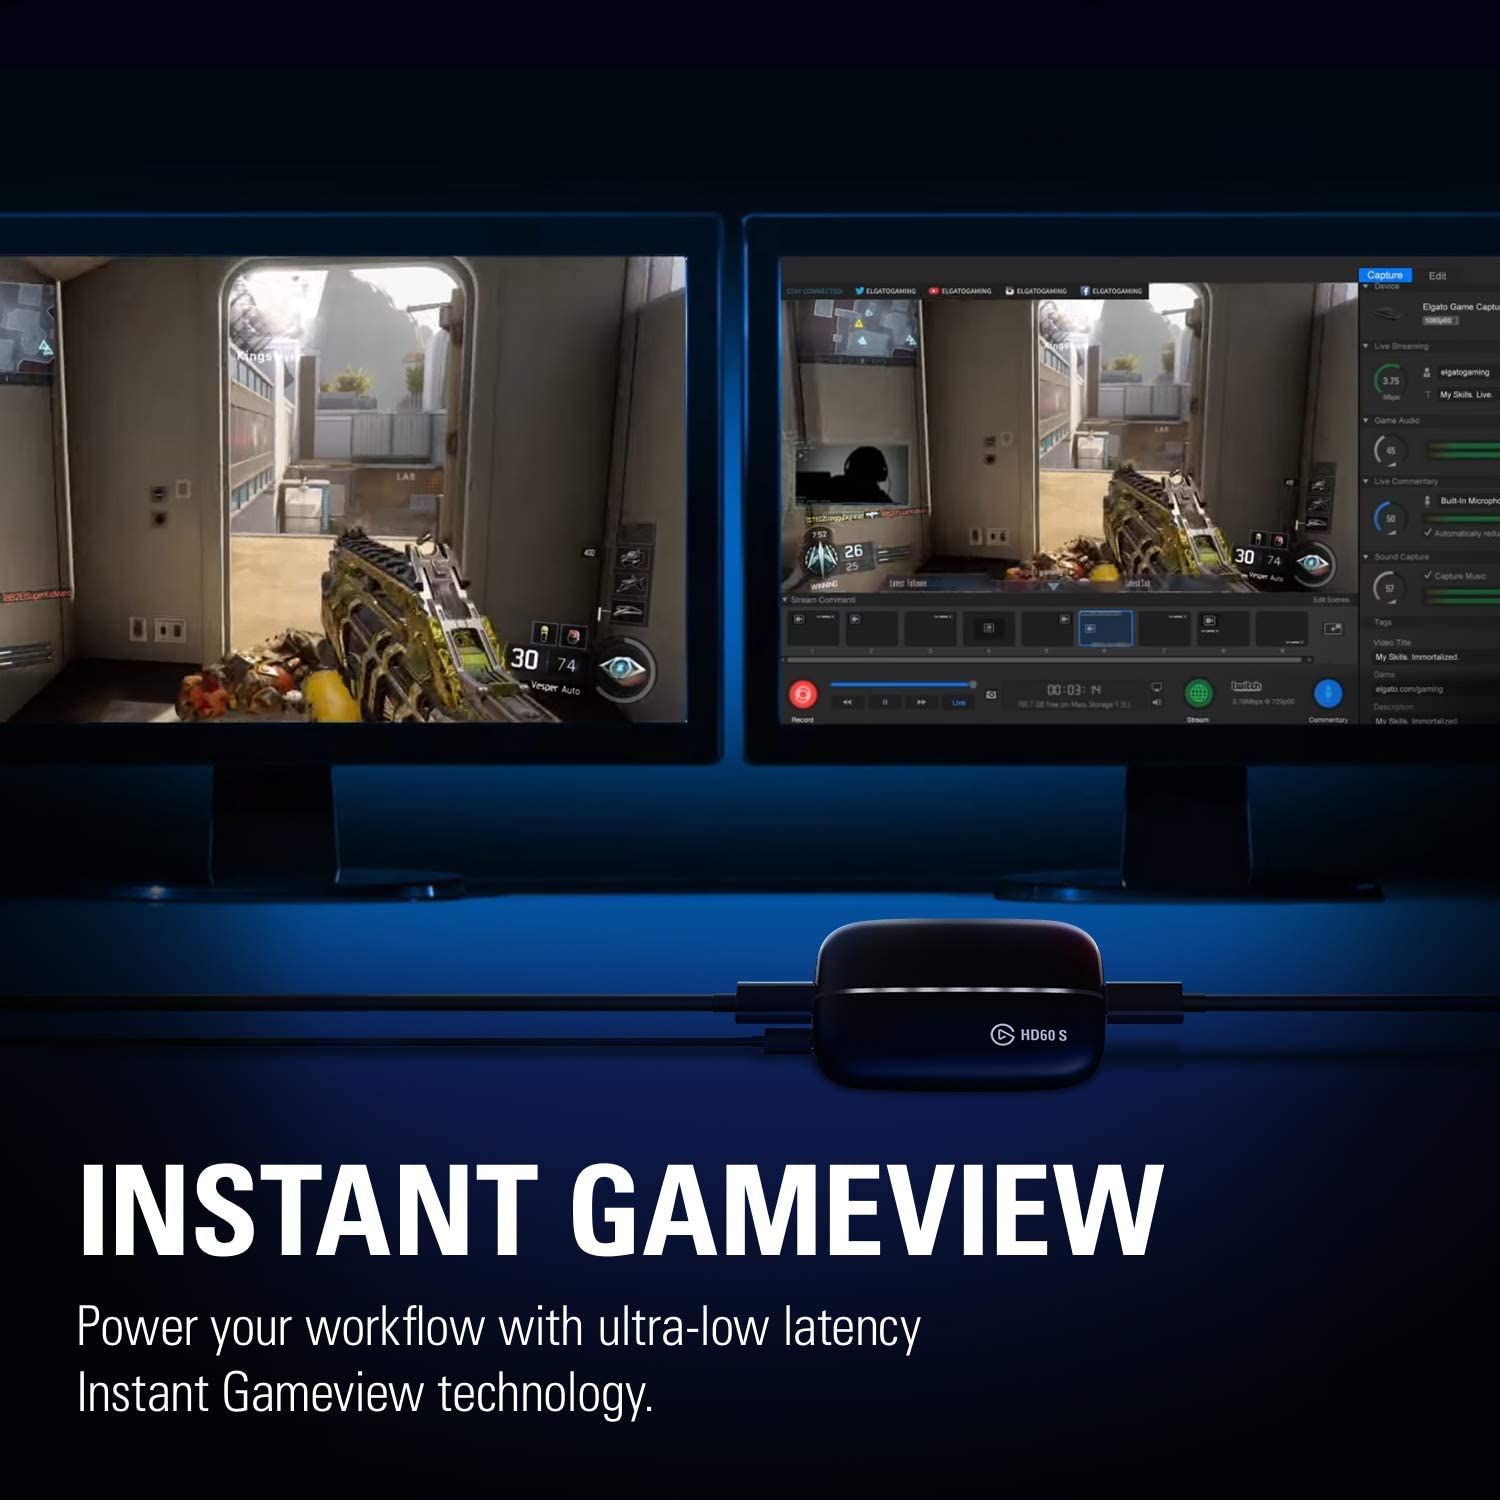 The Instant Gameview feature of Elgato HD60 S